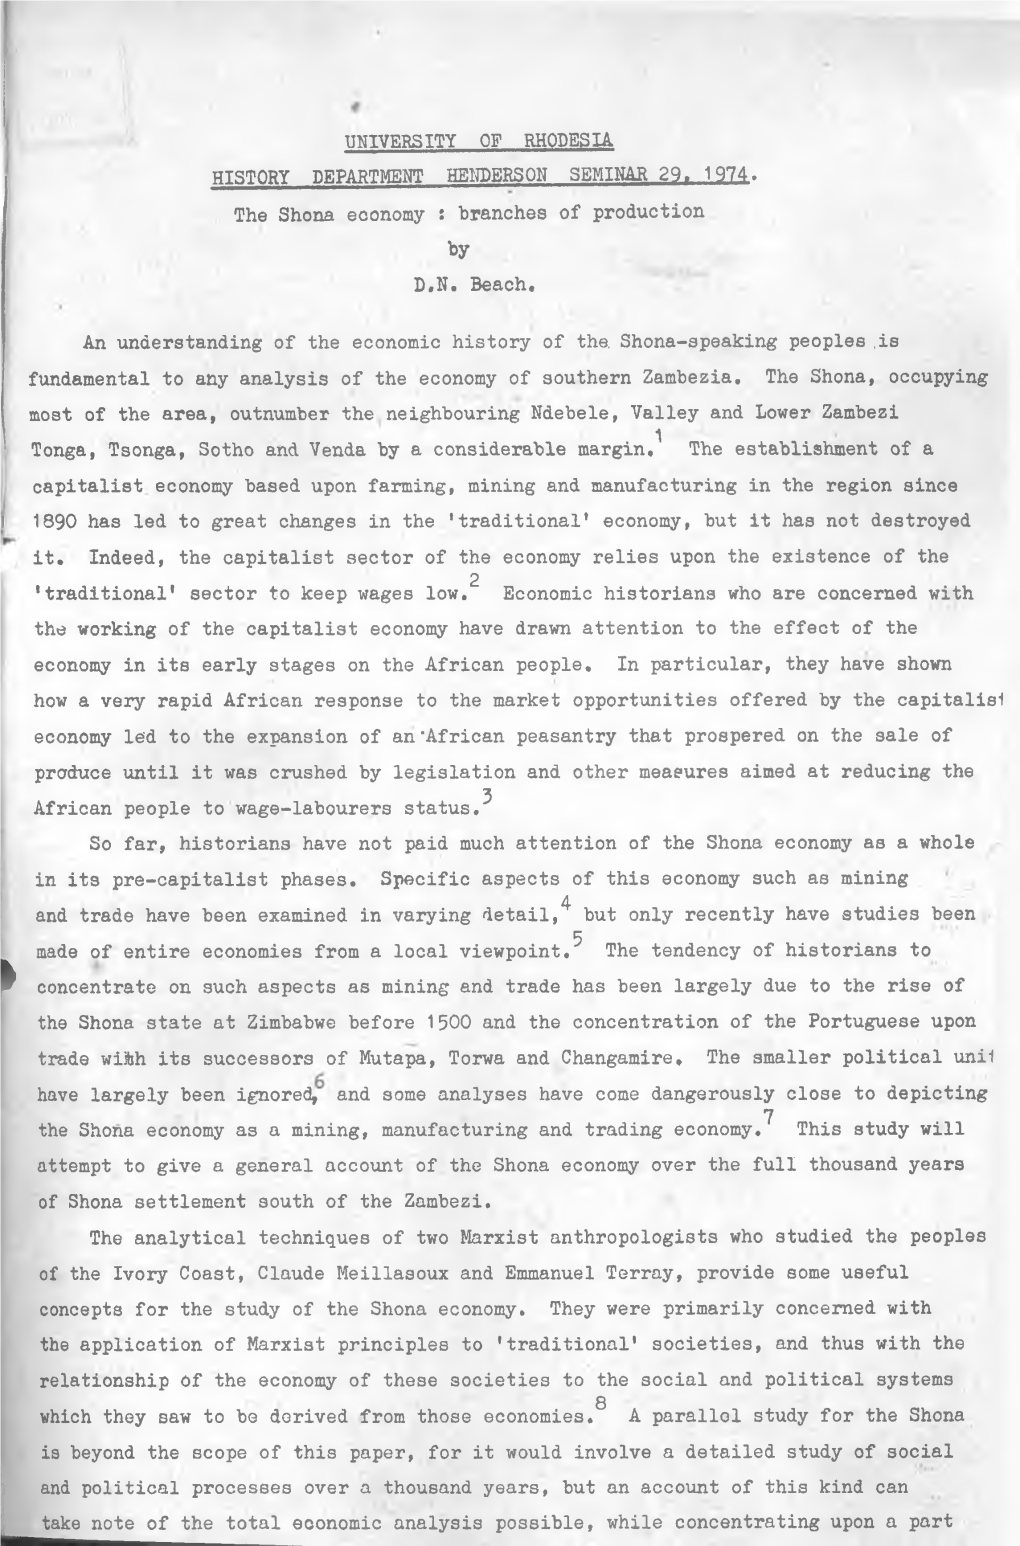 UNIVERSITY of RHODESIA HISTORY DEPARTMENT HENDERSON SEMINAR 29. 1974. the Shona Economy : Branches of Production by D.N. Beach